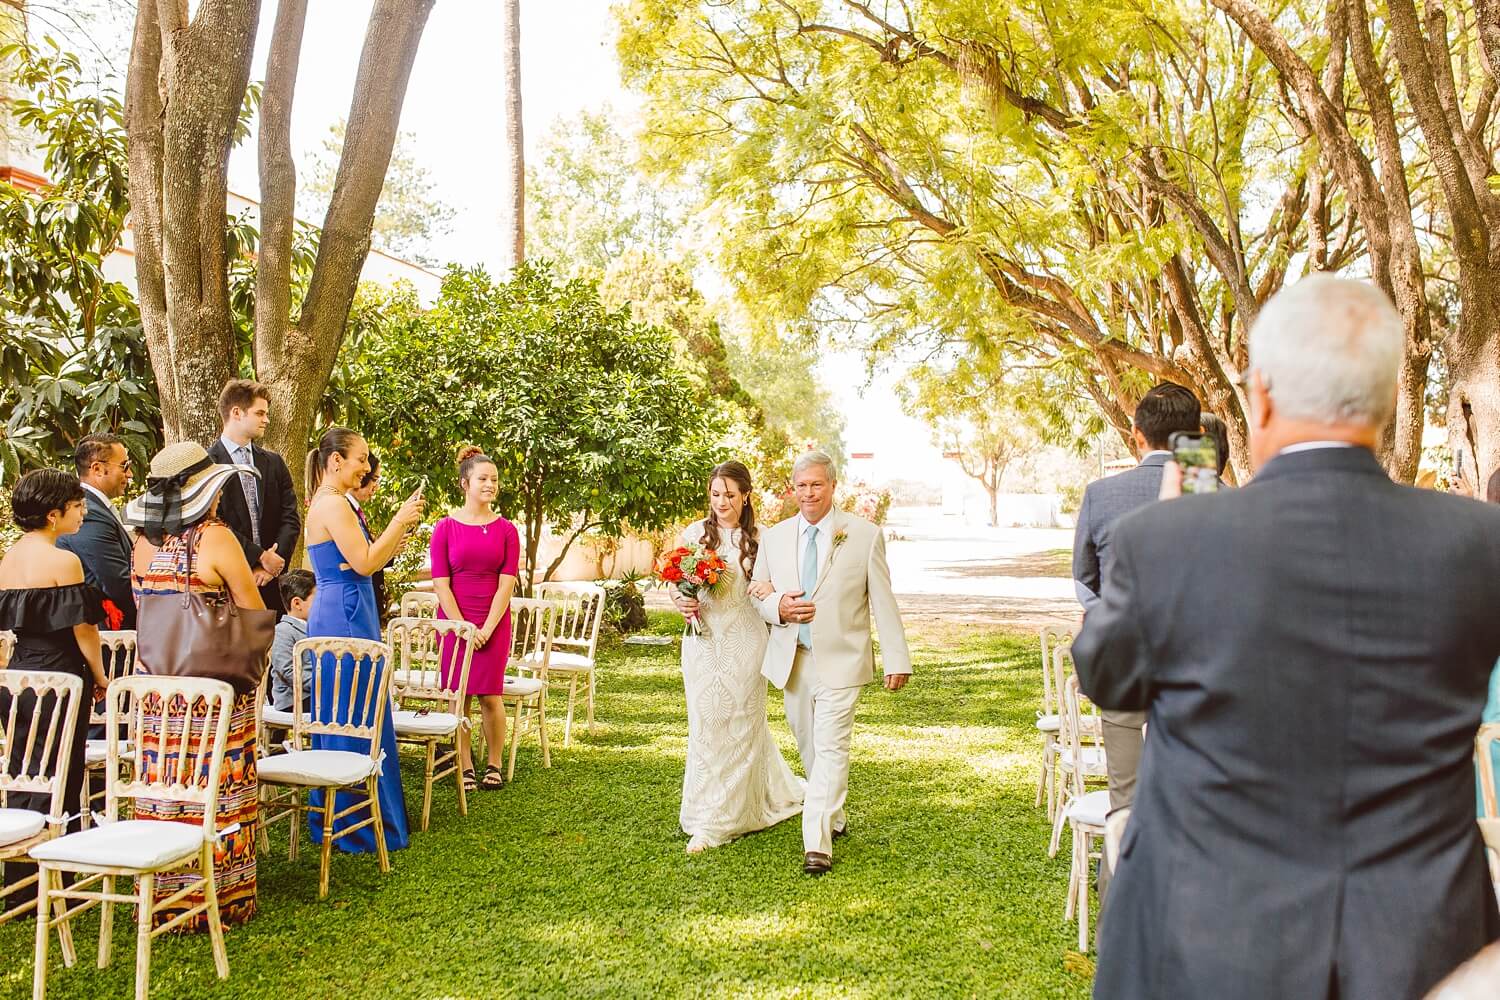 Bride walking down the aisle with father at Mexico destination wedding | Brooke Michelle Photo